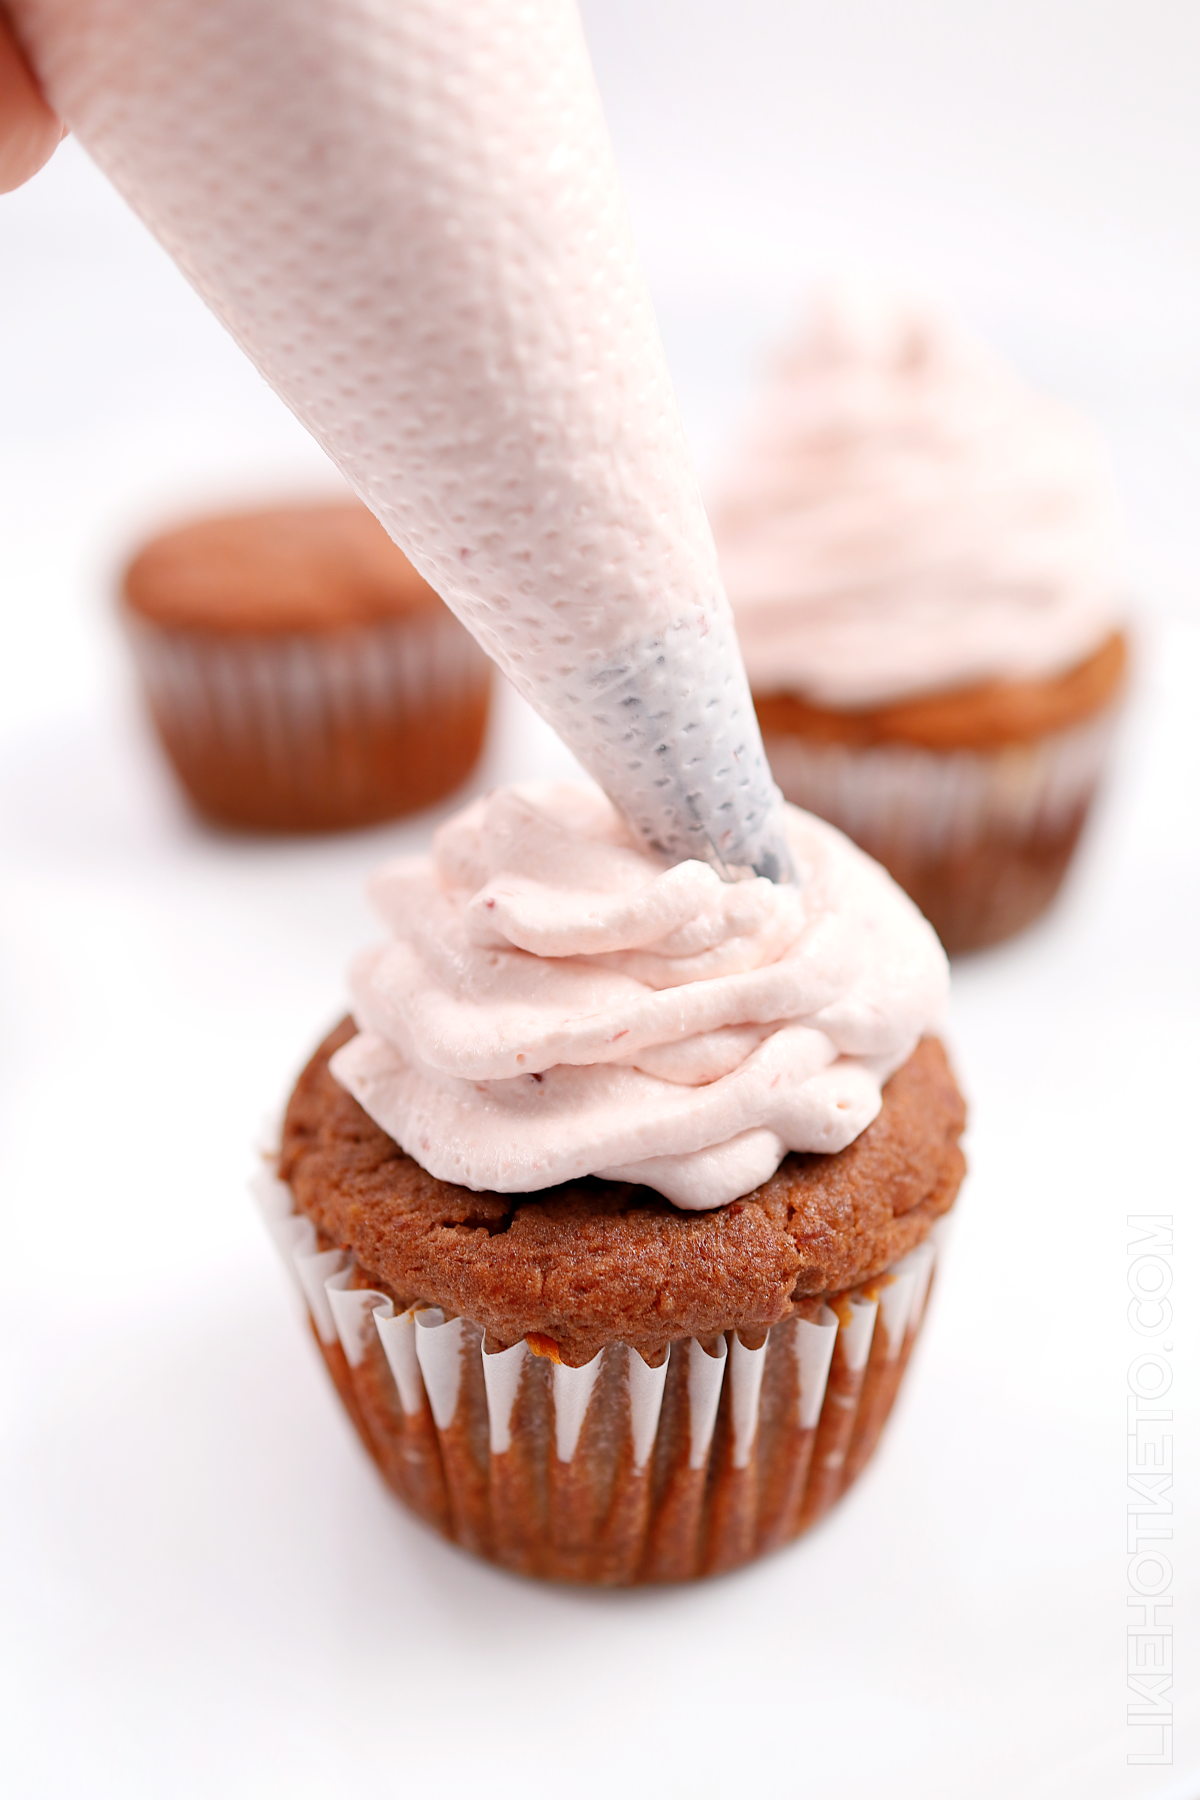 Applying  strawberry cream cheese frosting from a piping bag to a keto strawberry cupcake.